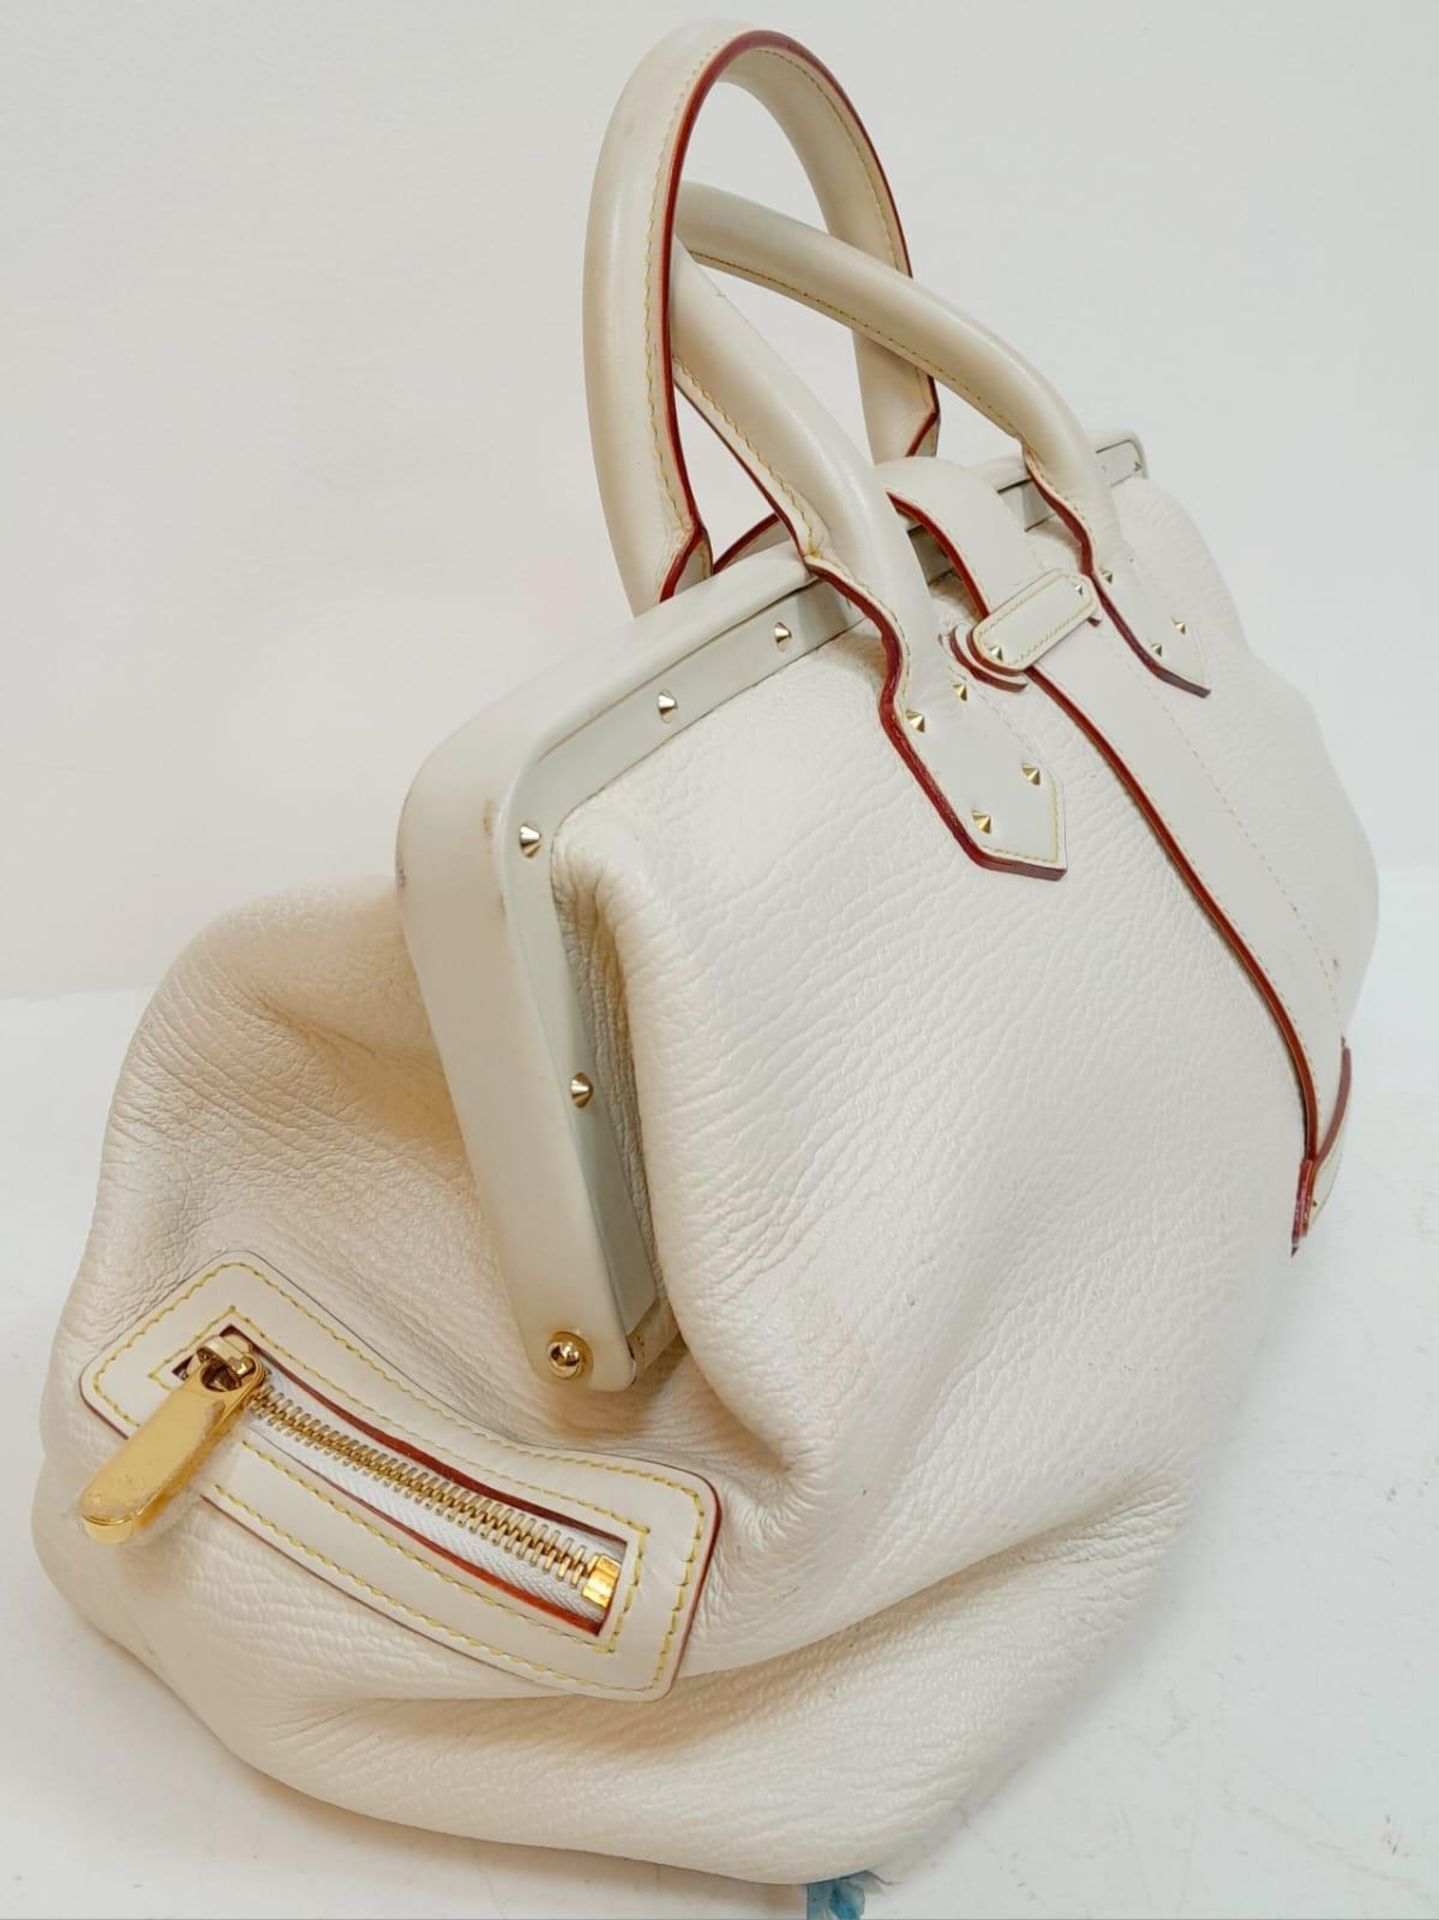 A Louis Vuitton Manhattan PM Suhali Leather Handbag. Soft white textured leather exterior with - Image 4 of 9